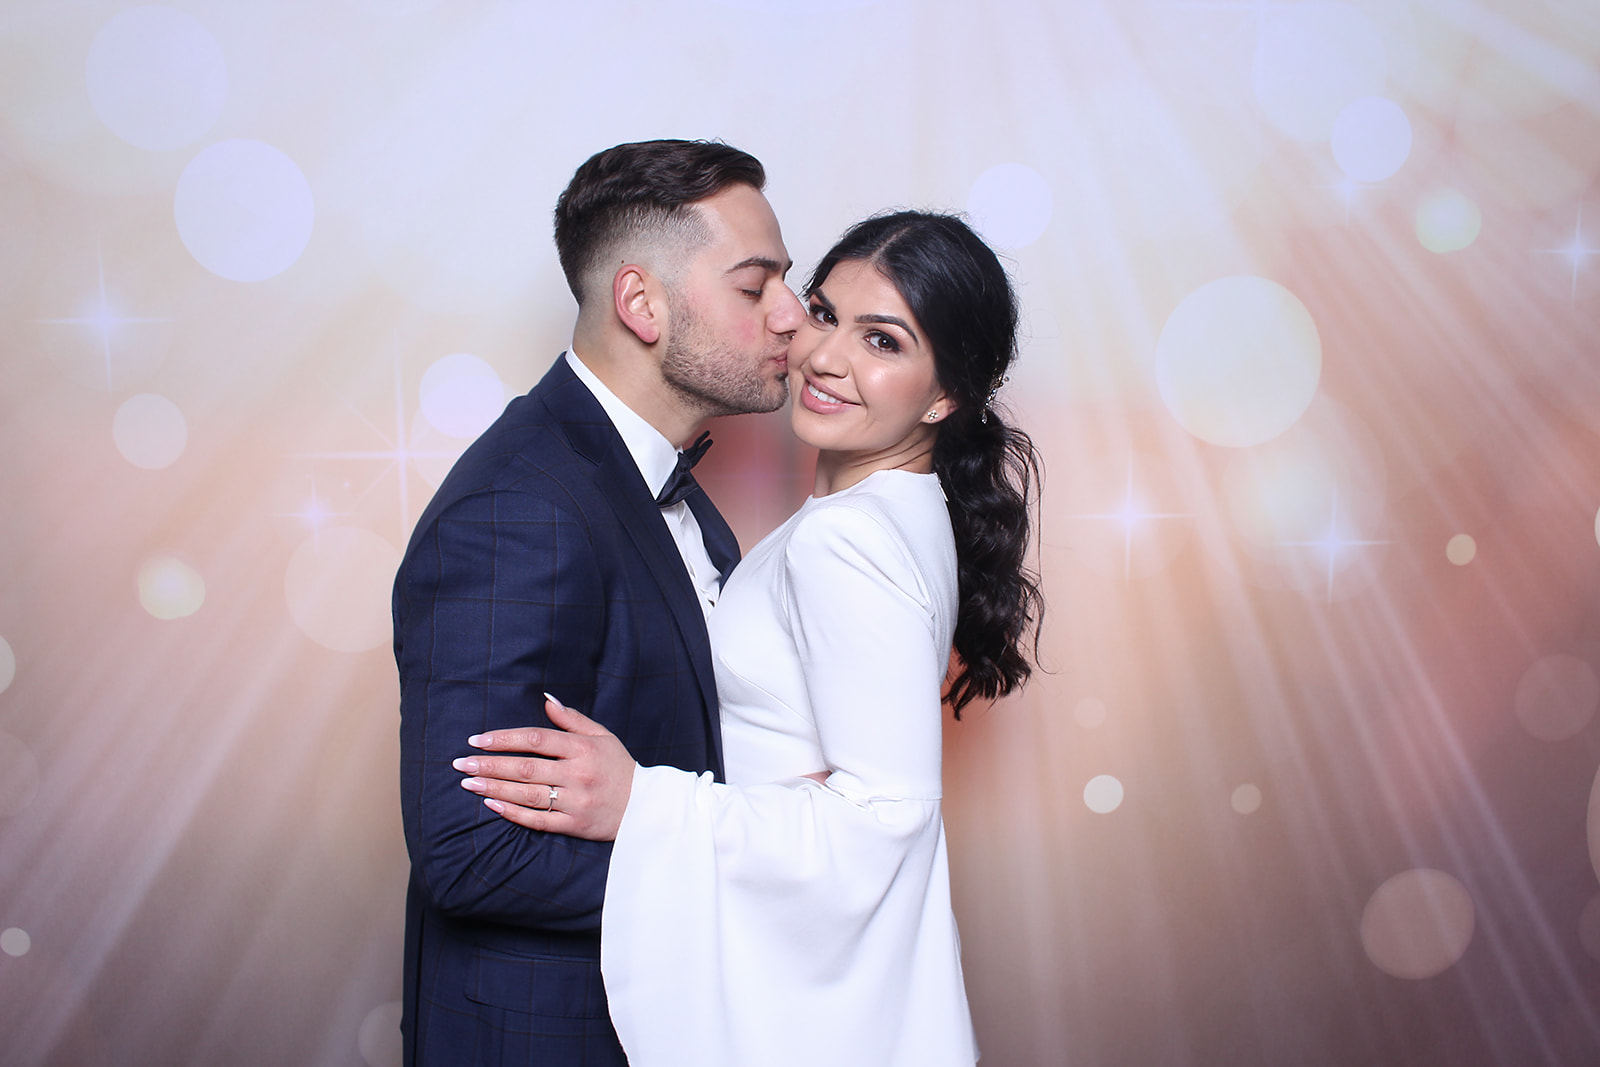 Taner and Izel's Engagement. Retro Booth by Oz Photo Booths